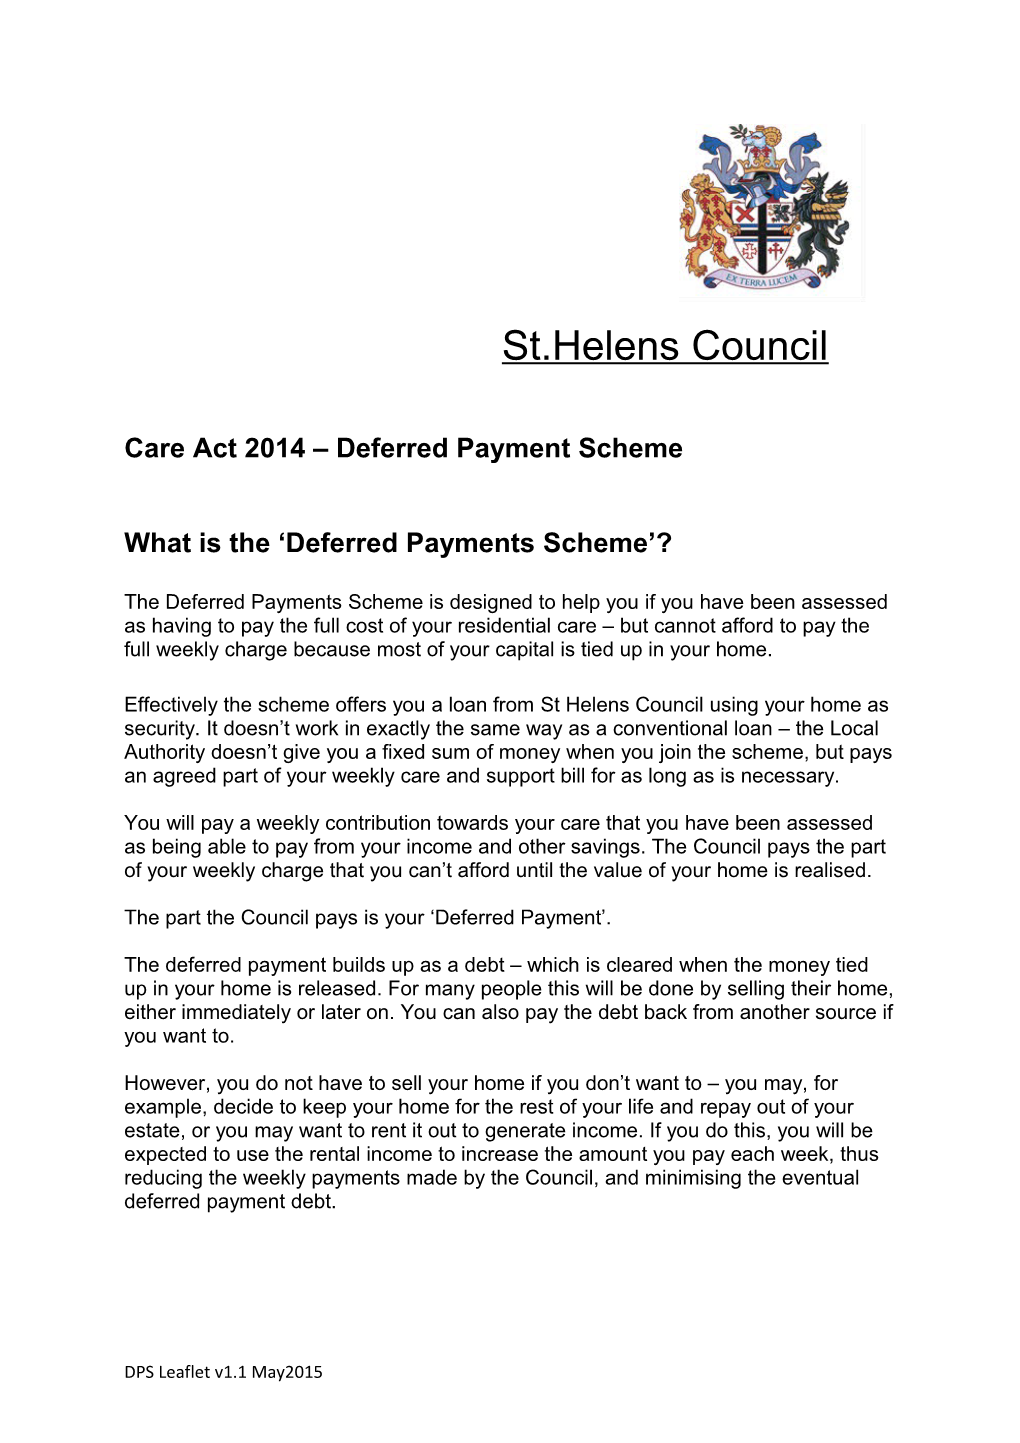 Care Act 2014 Deferred Payment Scheme